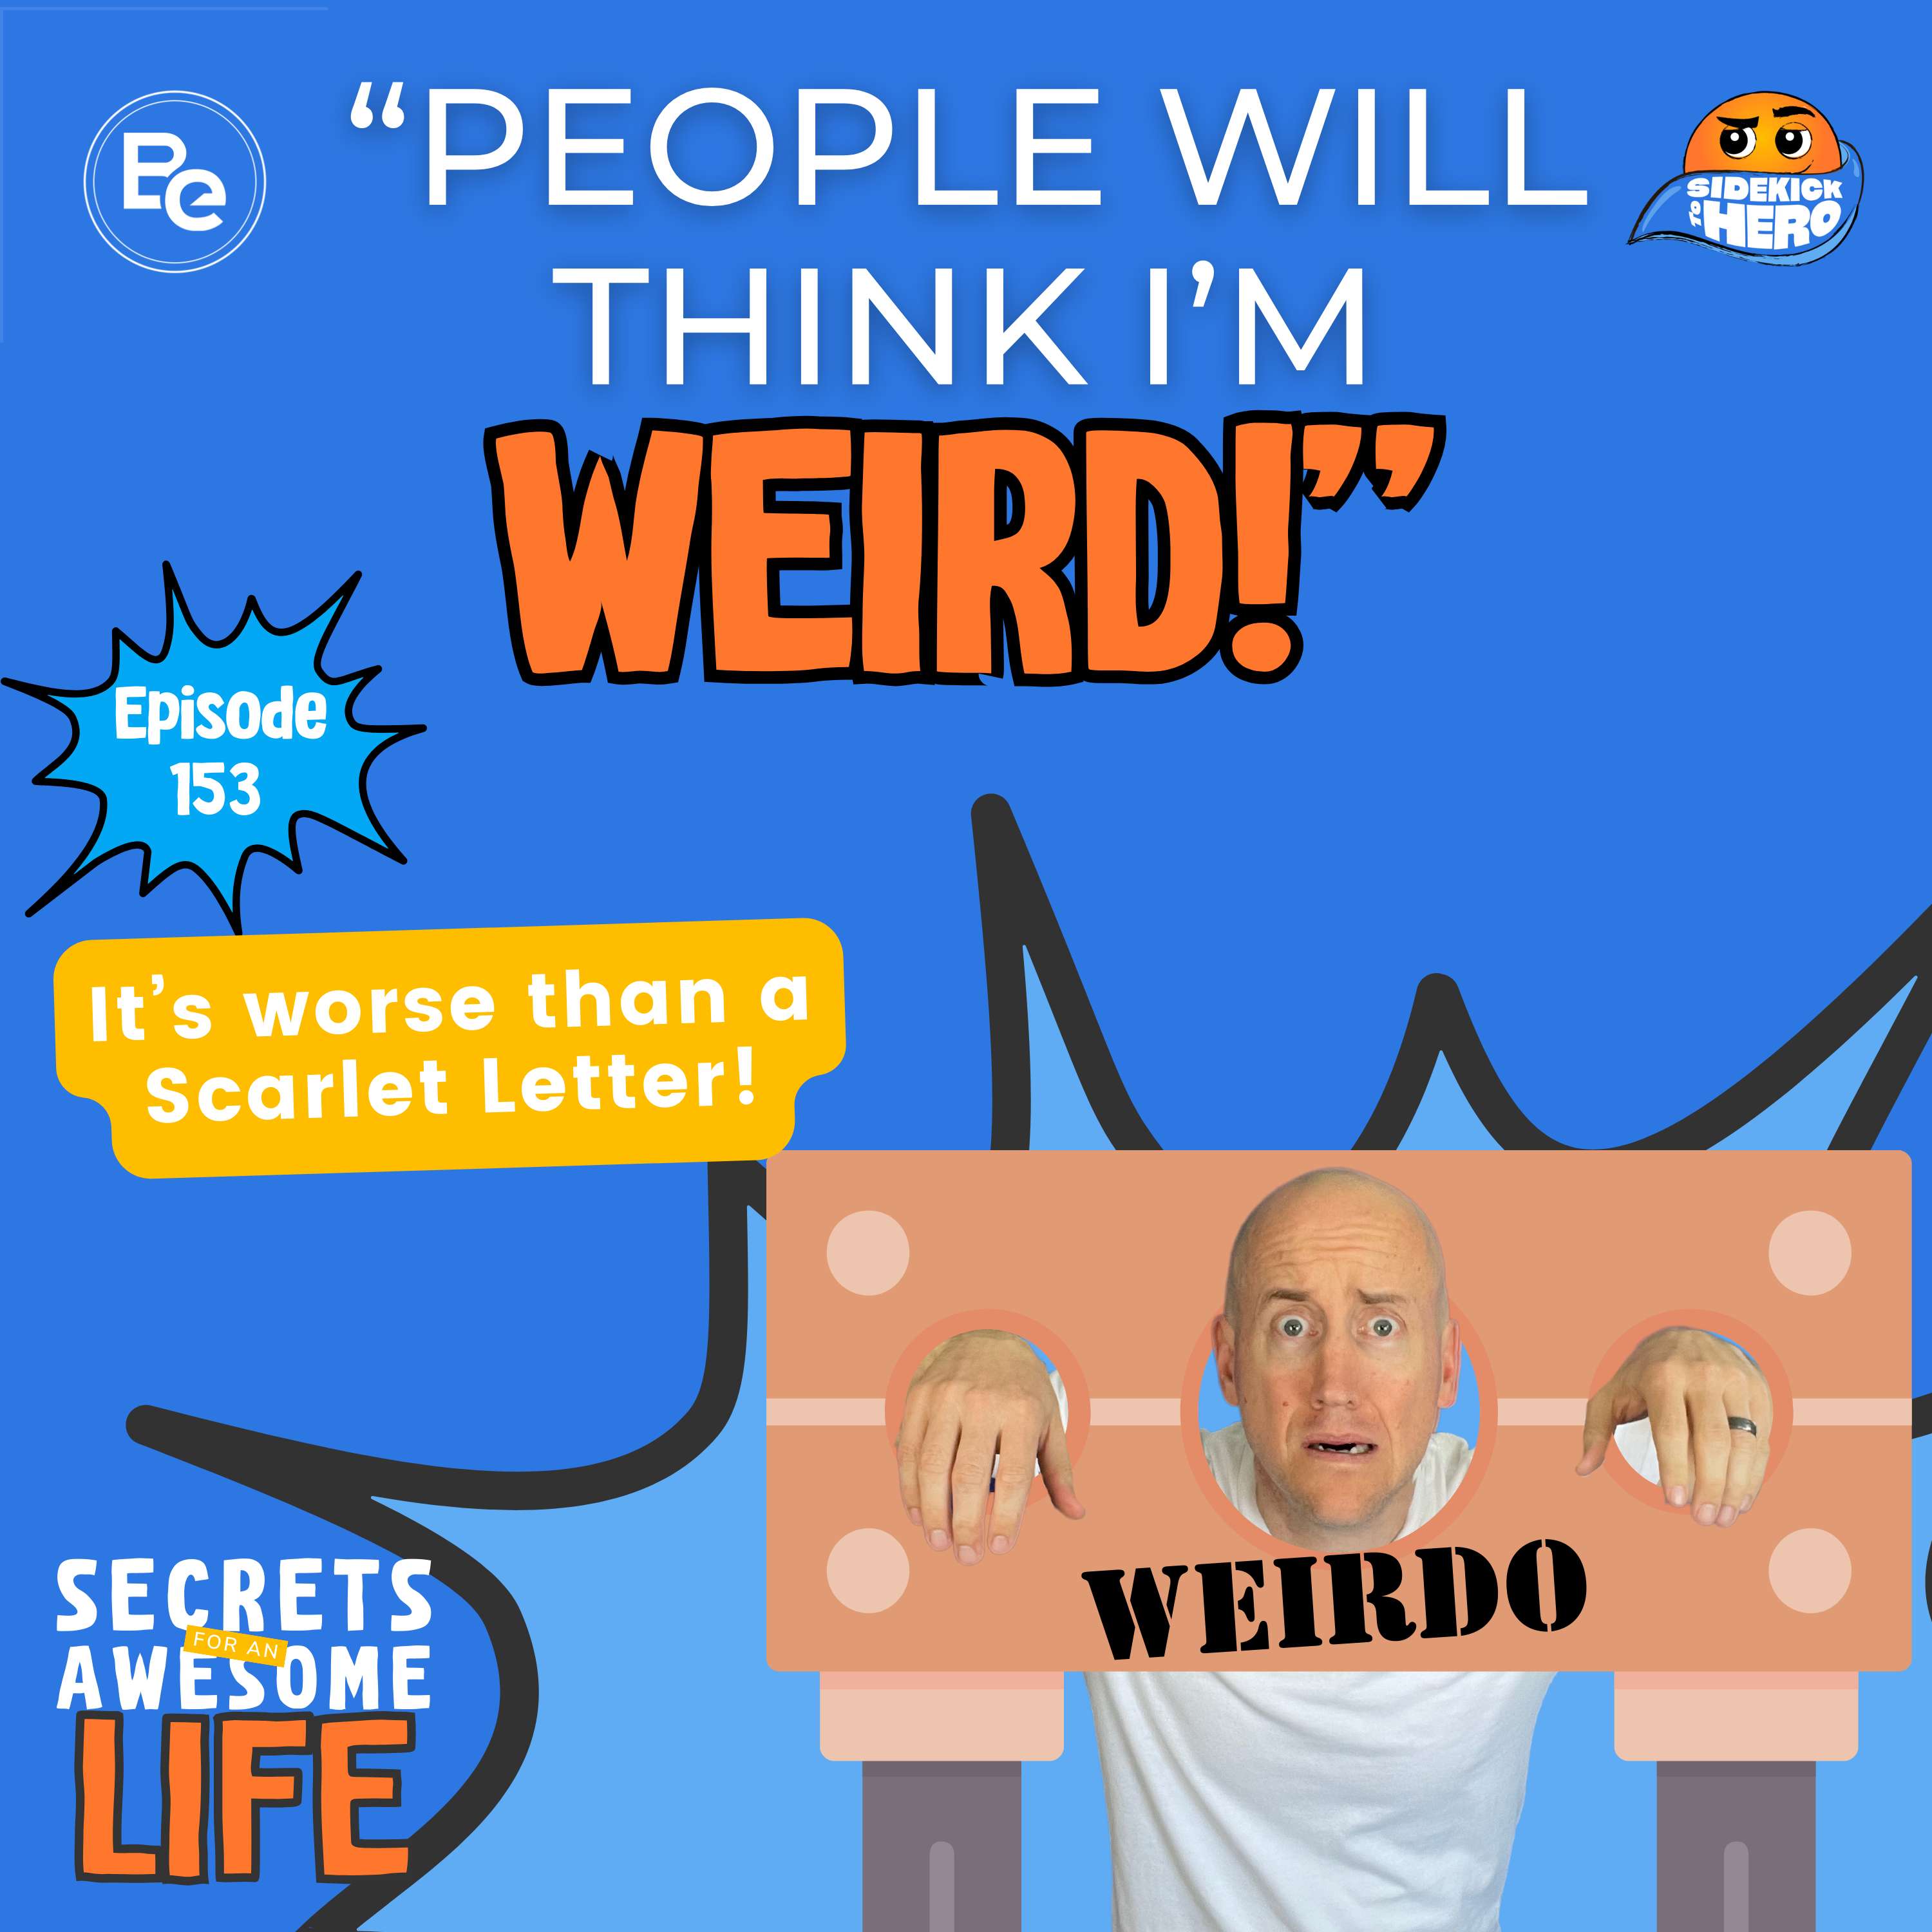 "People Will Think I'm Weird!"